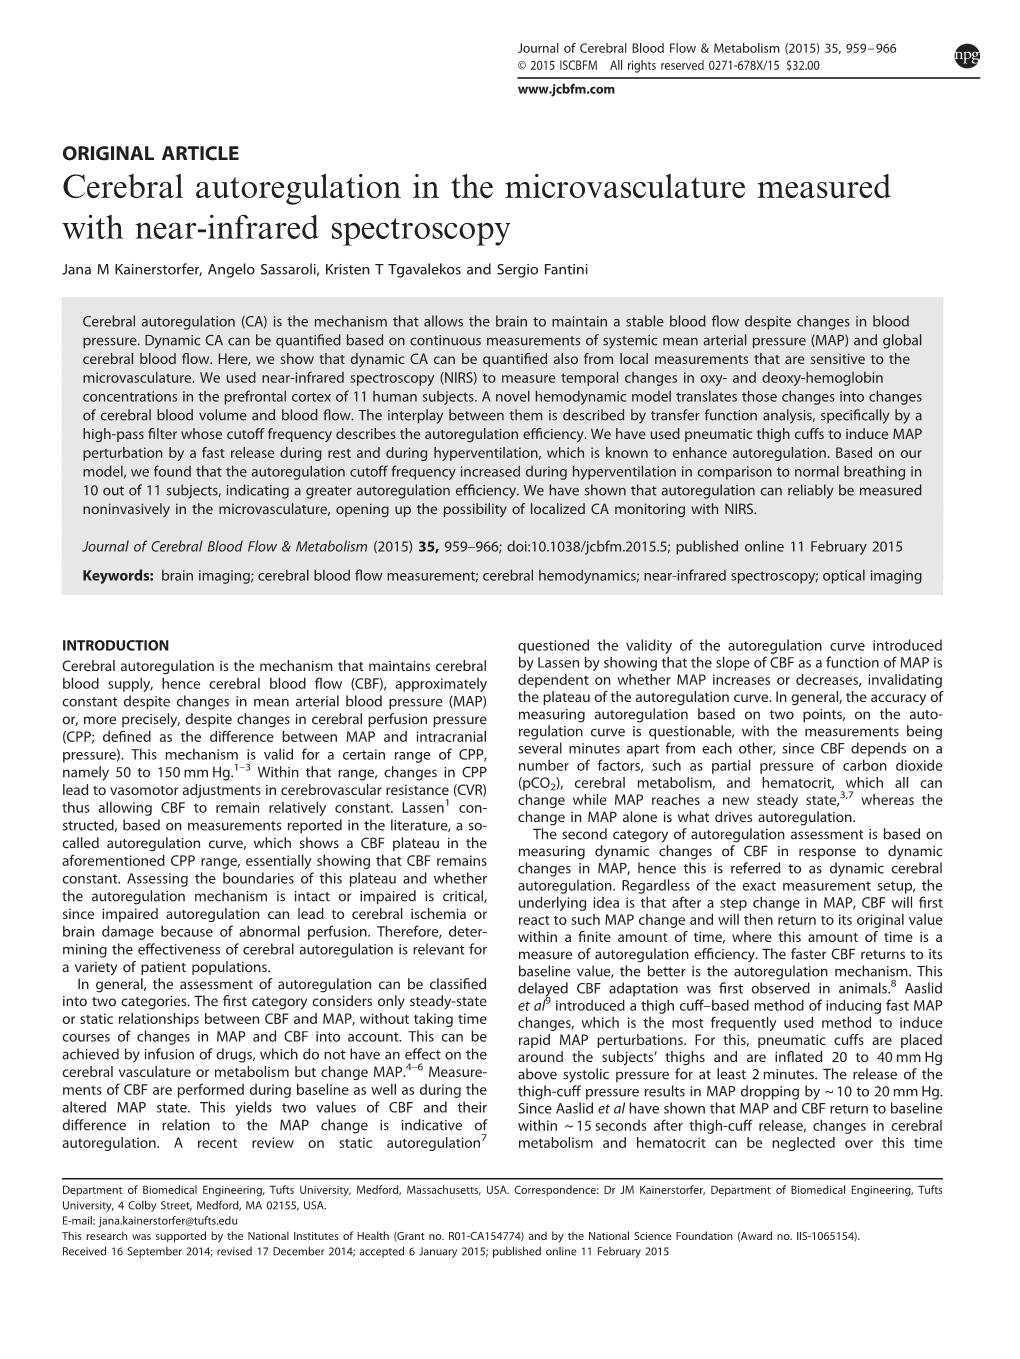 Cerebral Autoregulation in the Microvasculature Measured with Near-Infrared Spectroscopy